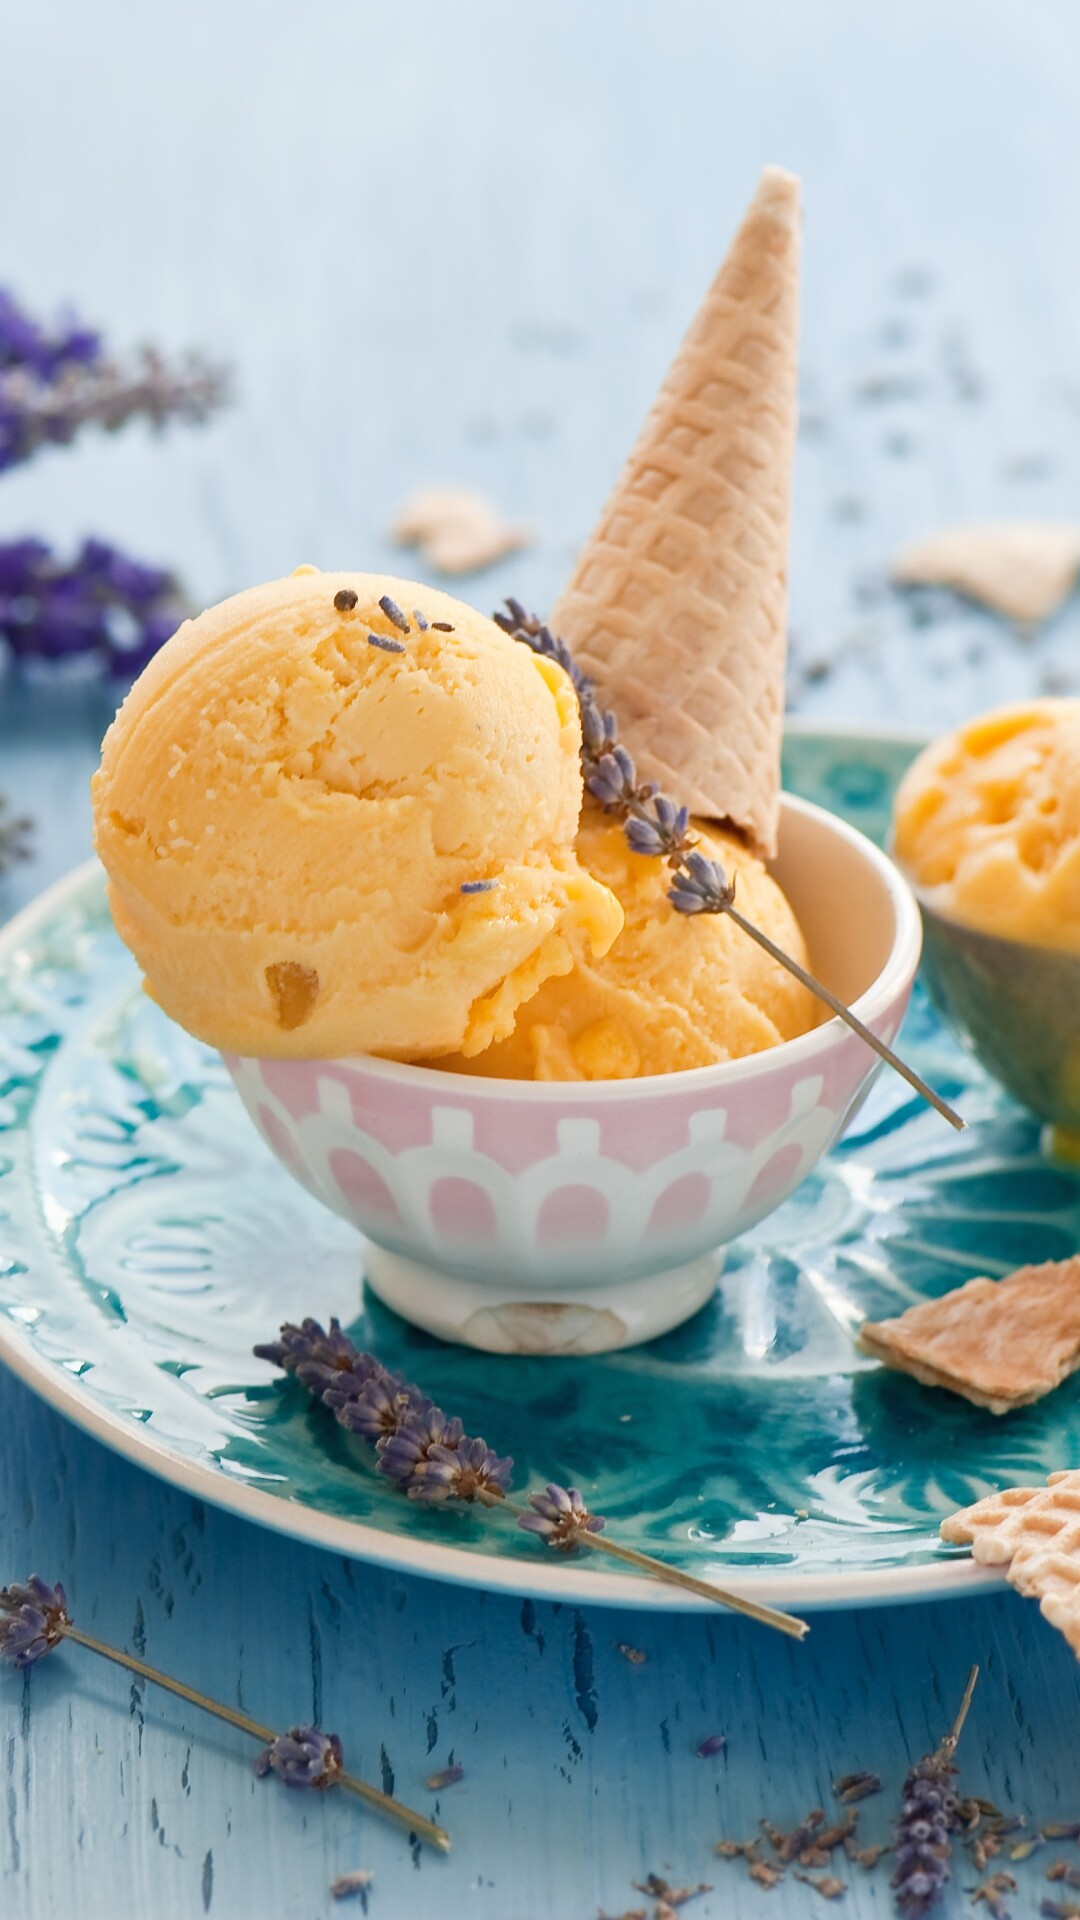 Ice Cream: A frozen dairy food that is sweetened and flavored. 1080x1920 Full HD Background.